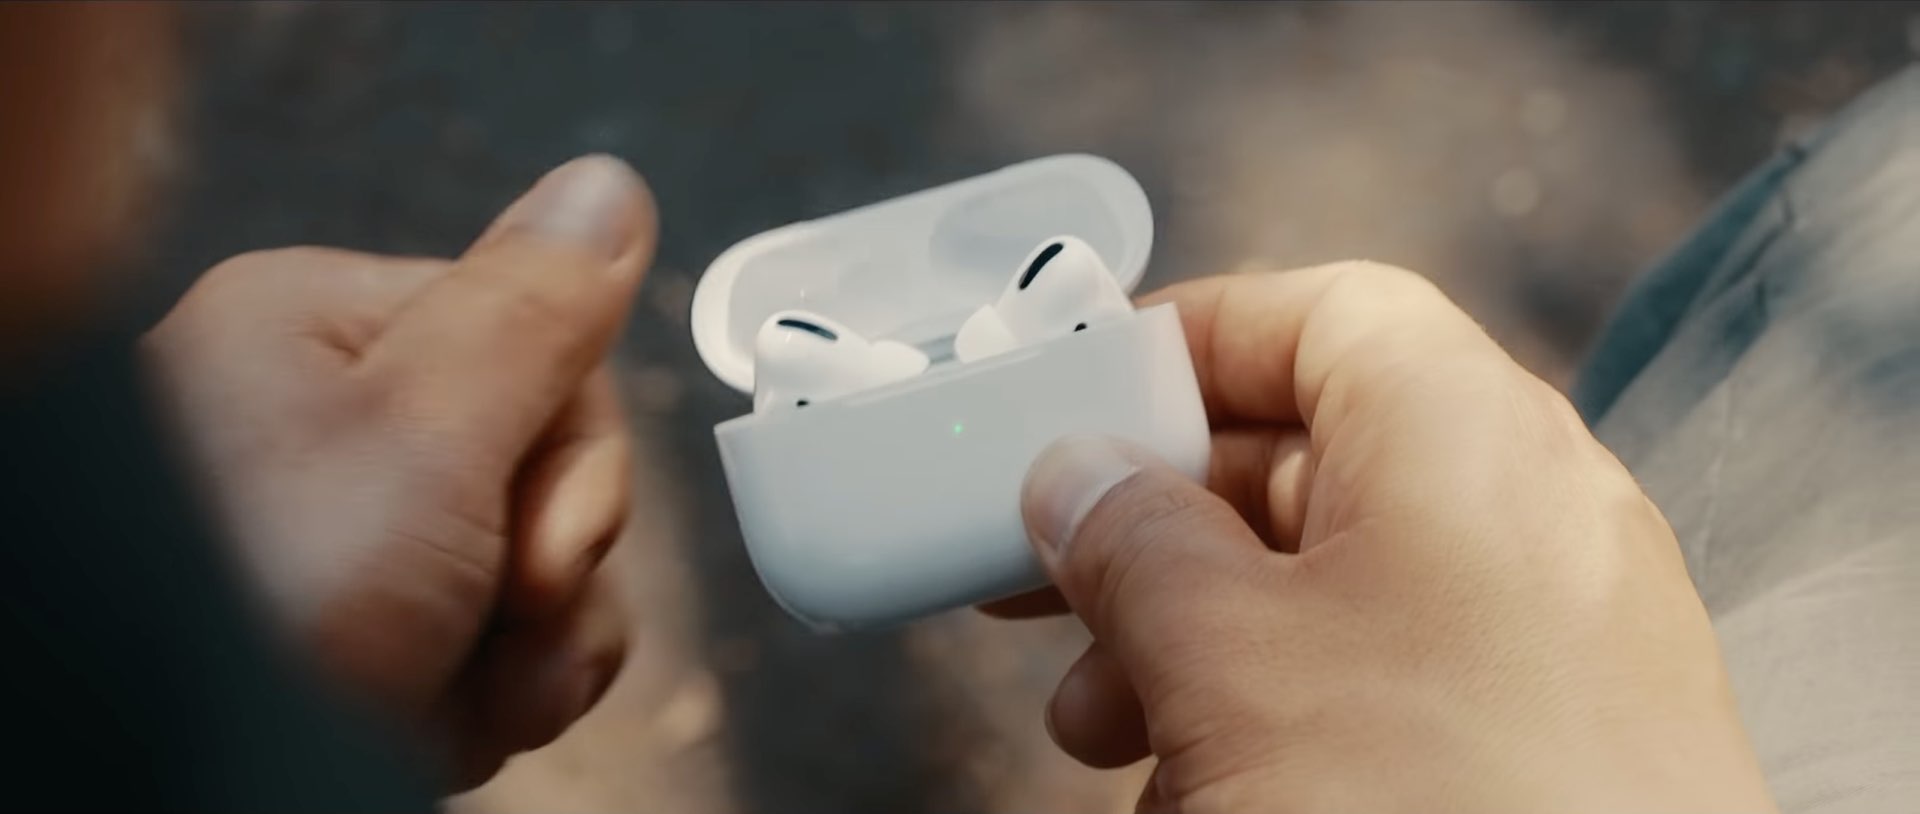  still from Apple ad showing the AirPods Pro case held in hand with the lid open